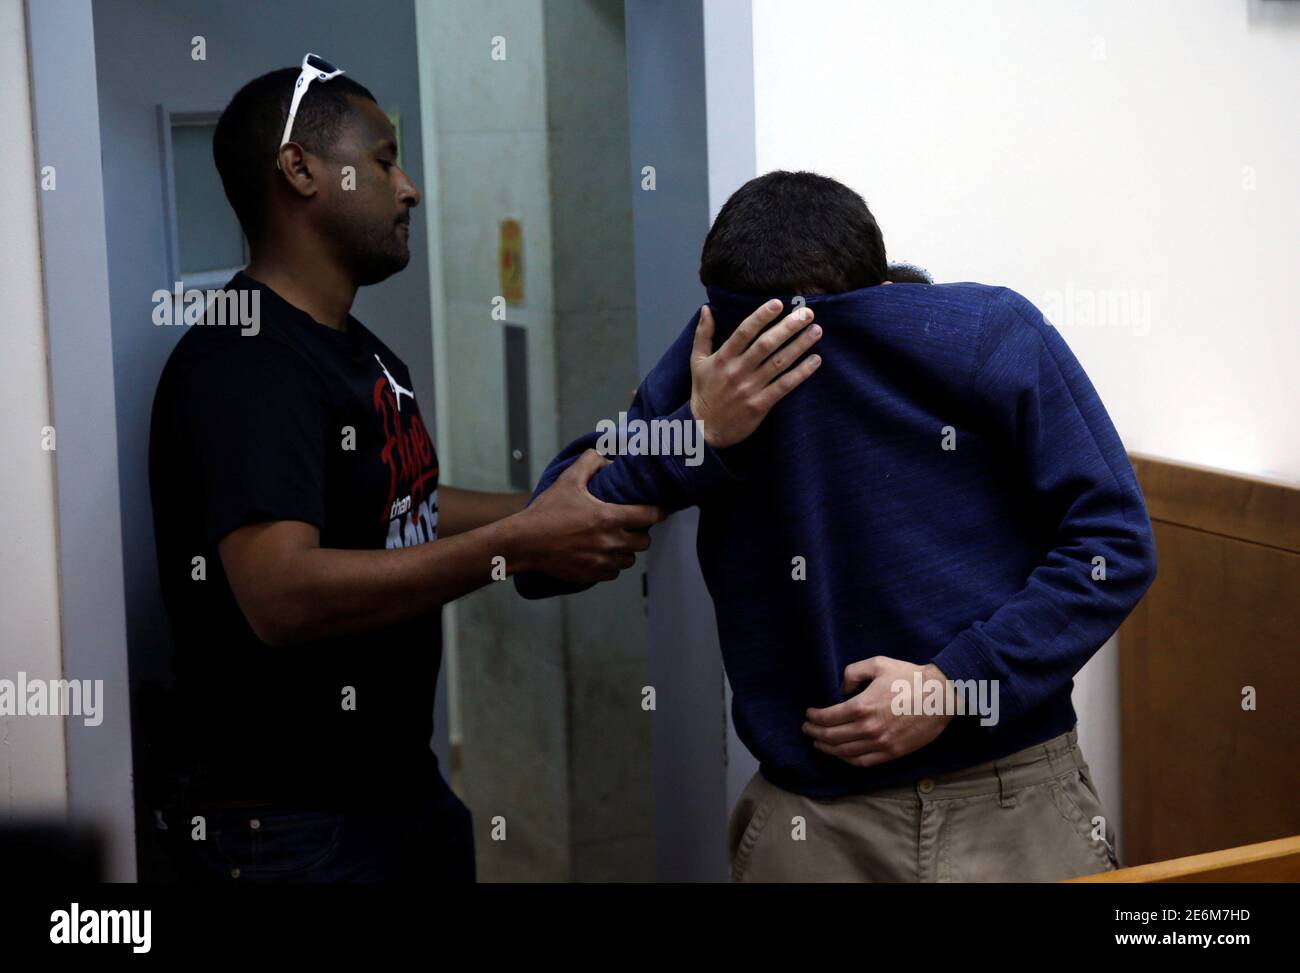 An U.S.-Israeli teen who was arrested in Israel on suspicion of making bomb threats against Jewish community centres in the United States, Australia and New Zealand over the past three month, is seen before the start of a remand hearing at Magistrate's Court in Rishon Lezion, Israel March 23, 2017. REUTERS/Baz Ratner Stock Photo